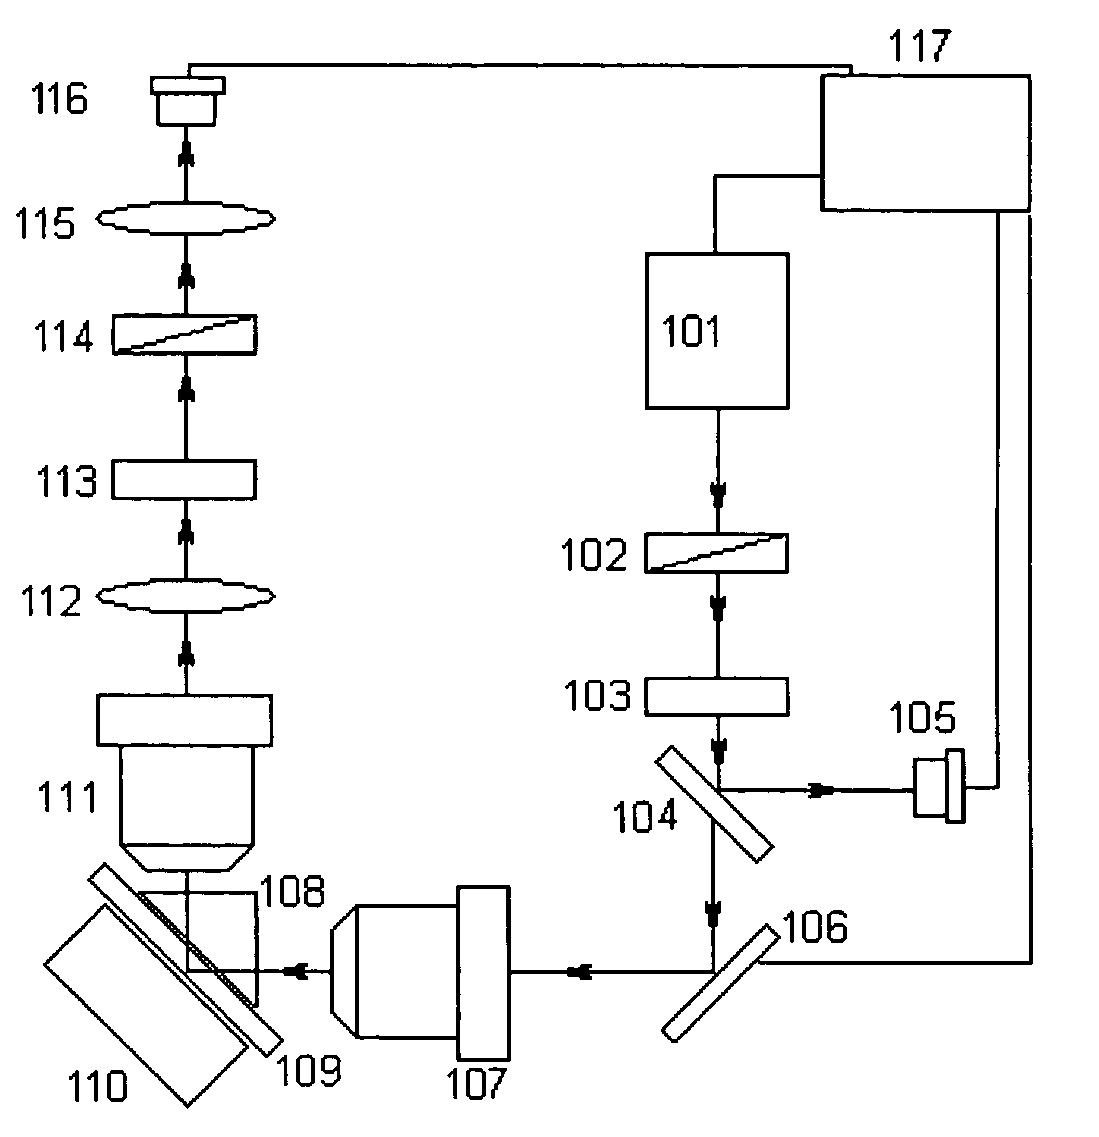 Magnetic field and electrical current visualization system